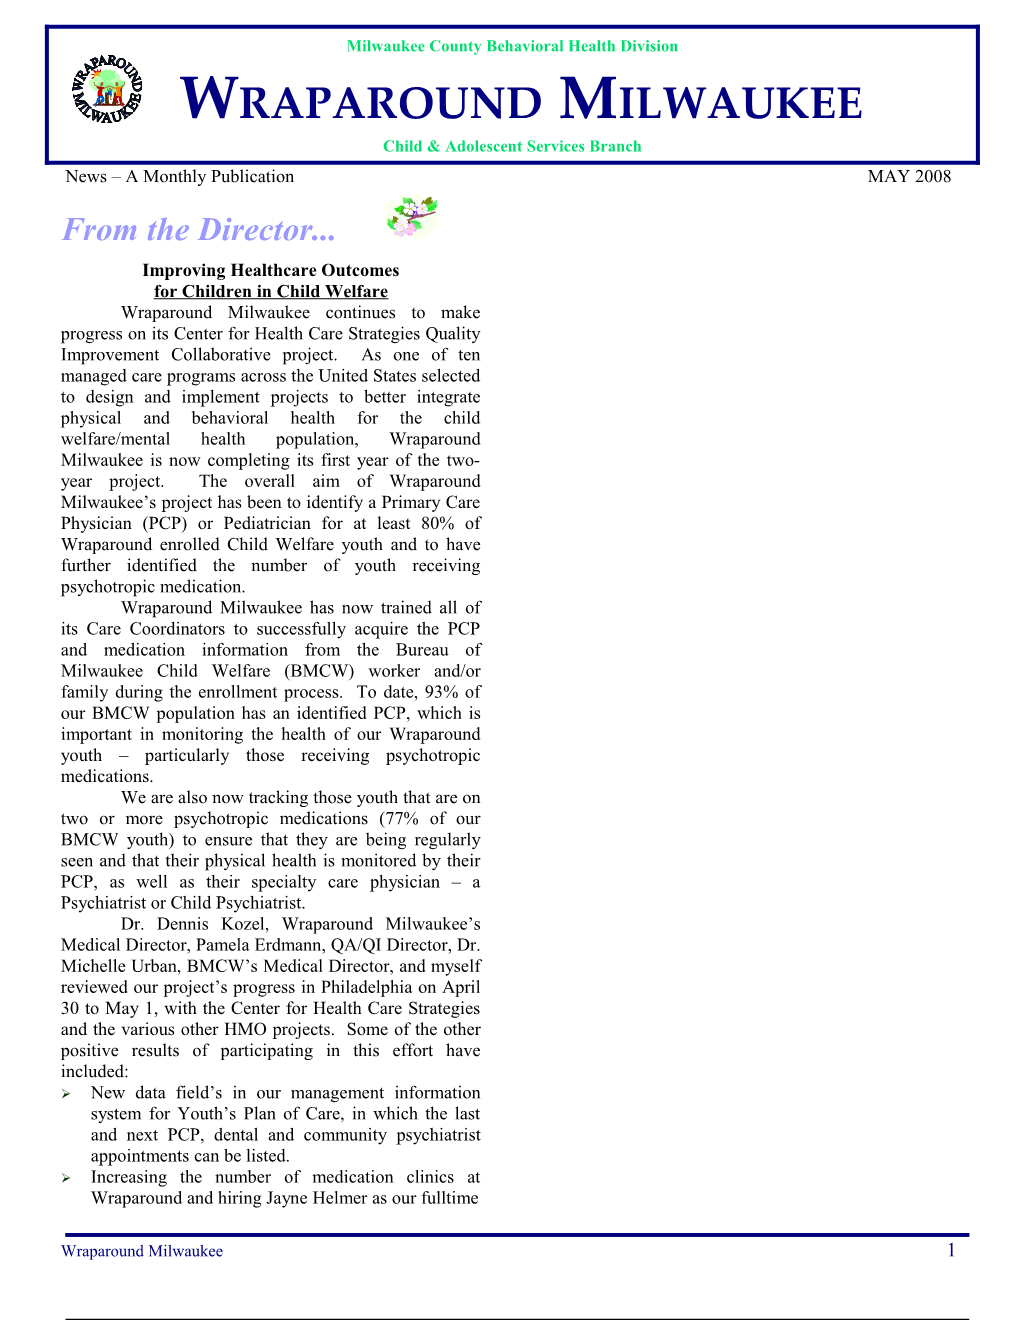 News a Monthly Publication MAY 2008